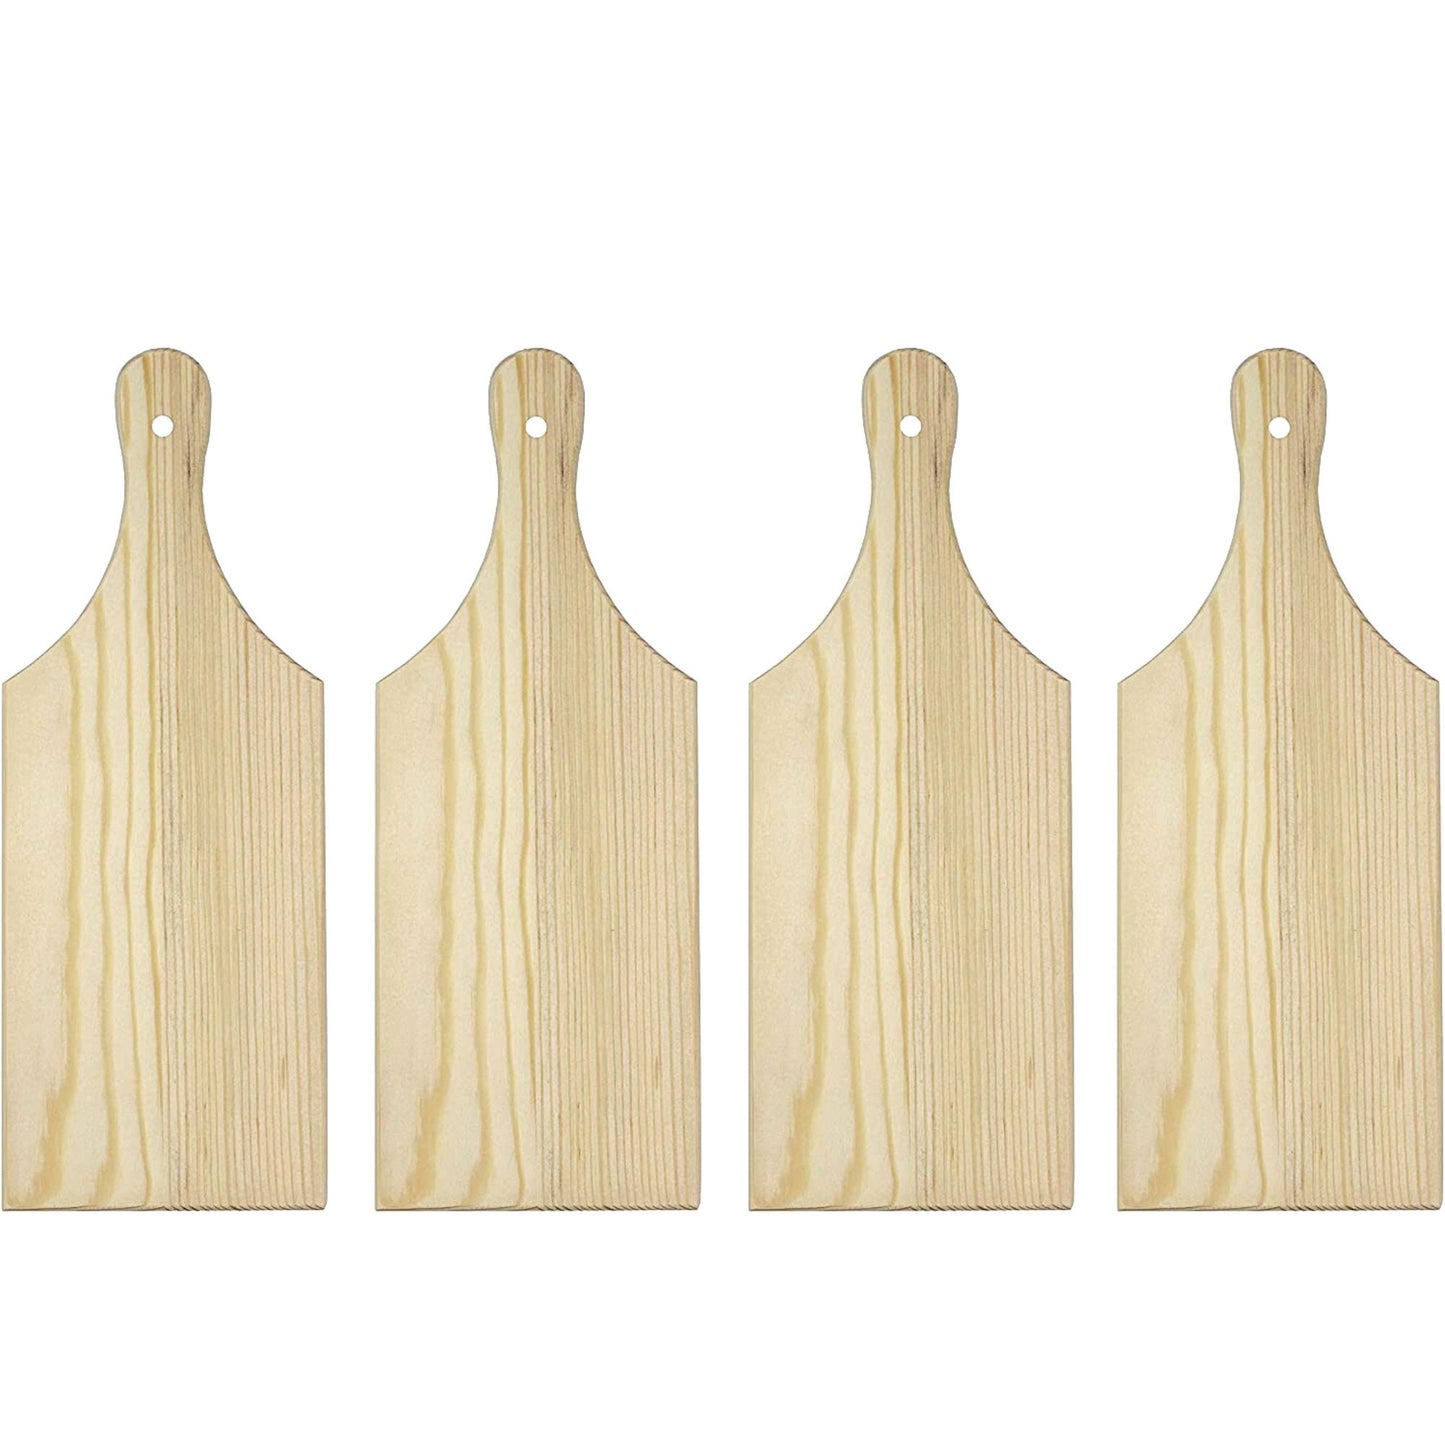 Mini Charcuterie Wooden Cheese Boards Set of 4